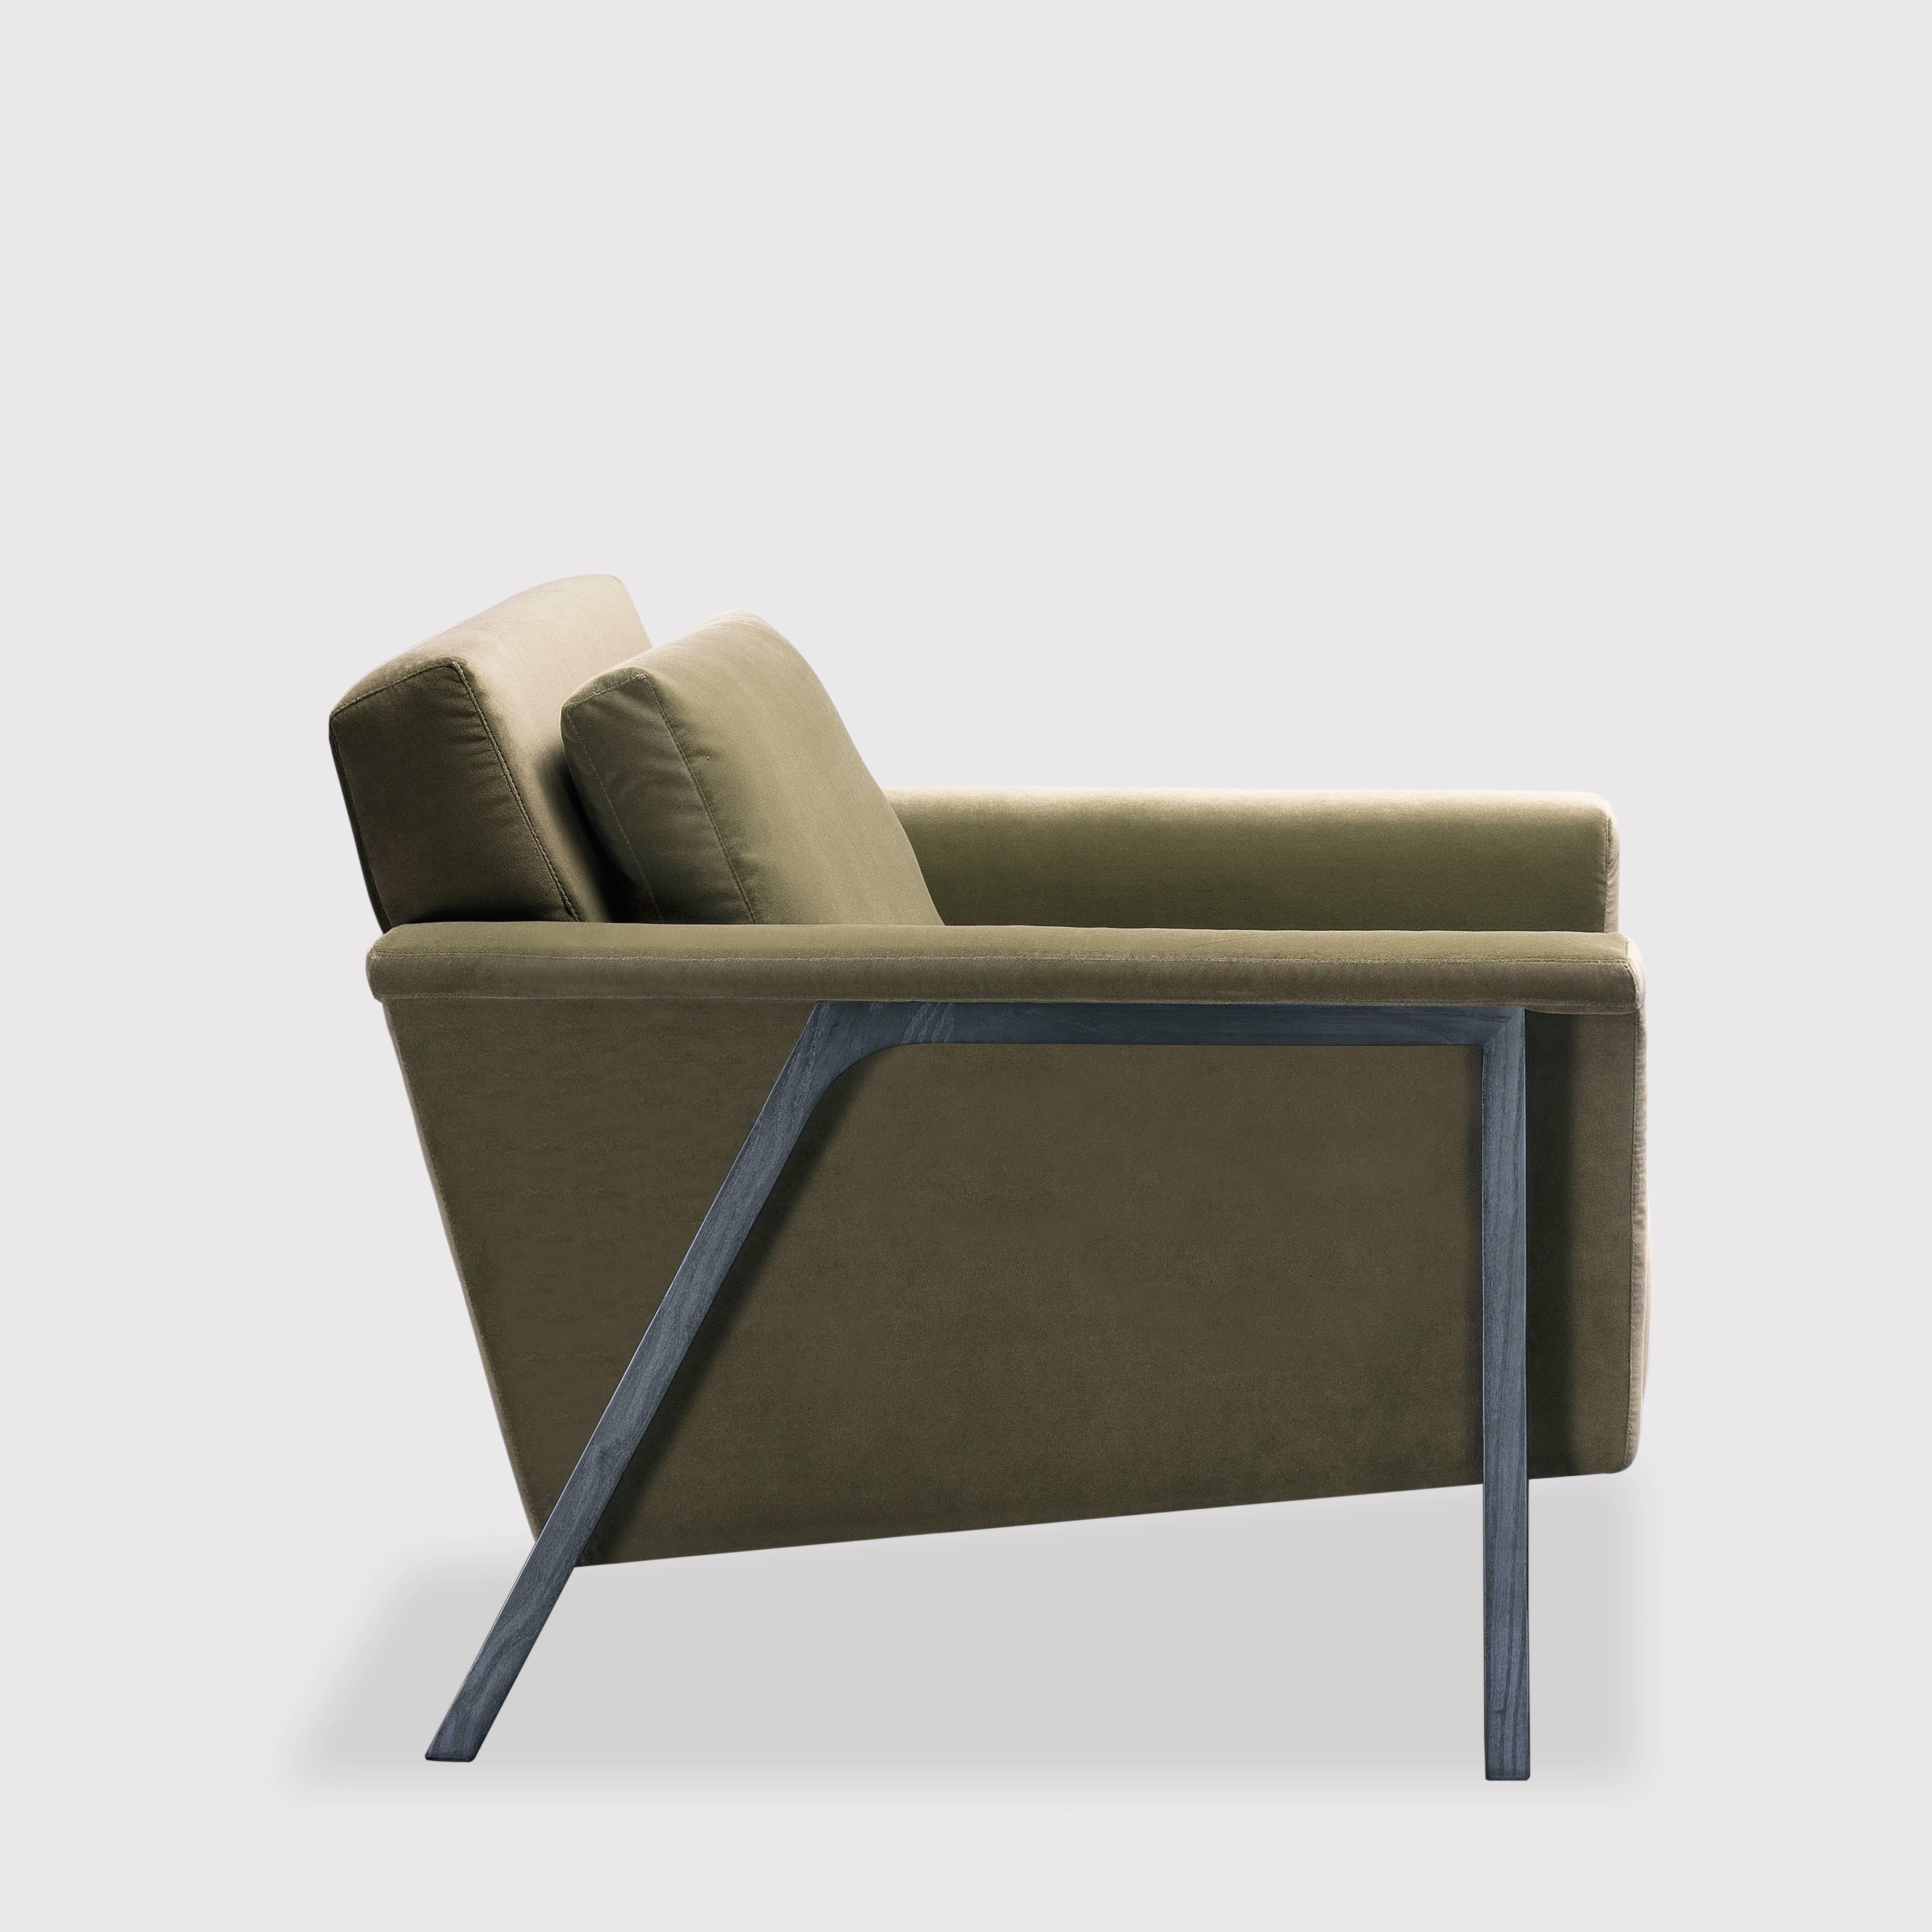 The Maxx armchair is a generously proportioned lounge chair taking its design cues from the Modernist style. The timber legs are positioned outside of the arm and reach from front to back in an inclined arch, effectively cradling the upholstered